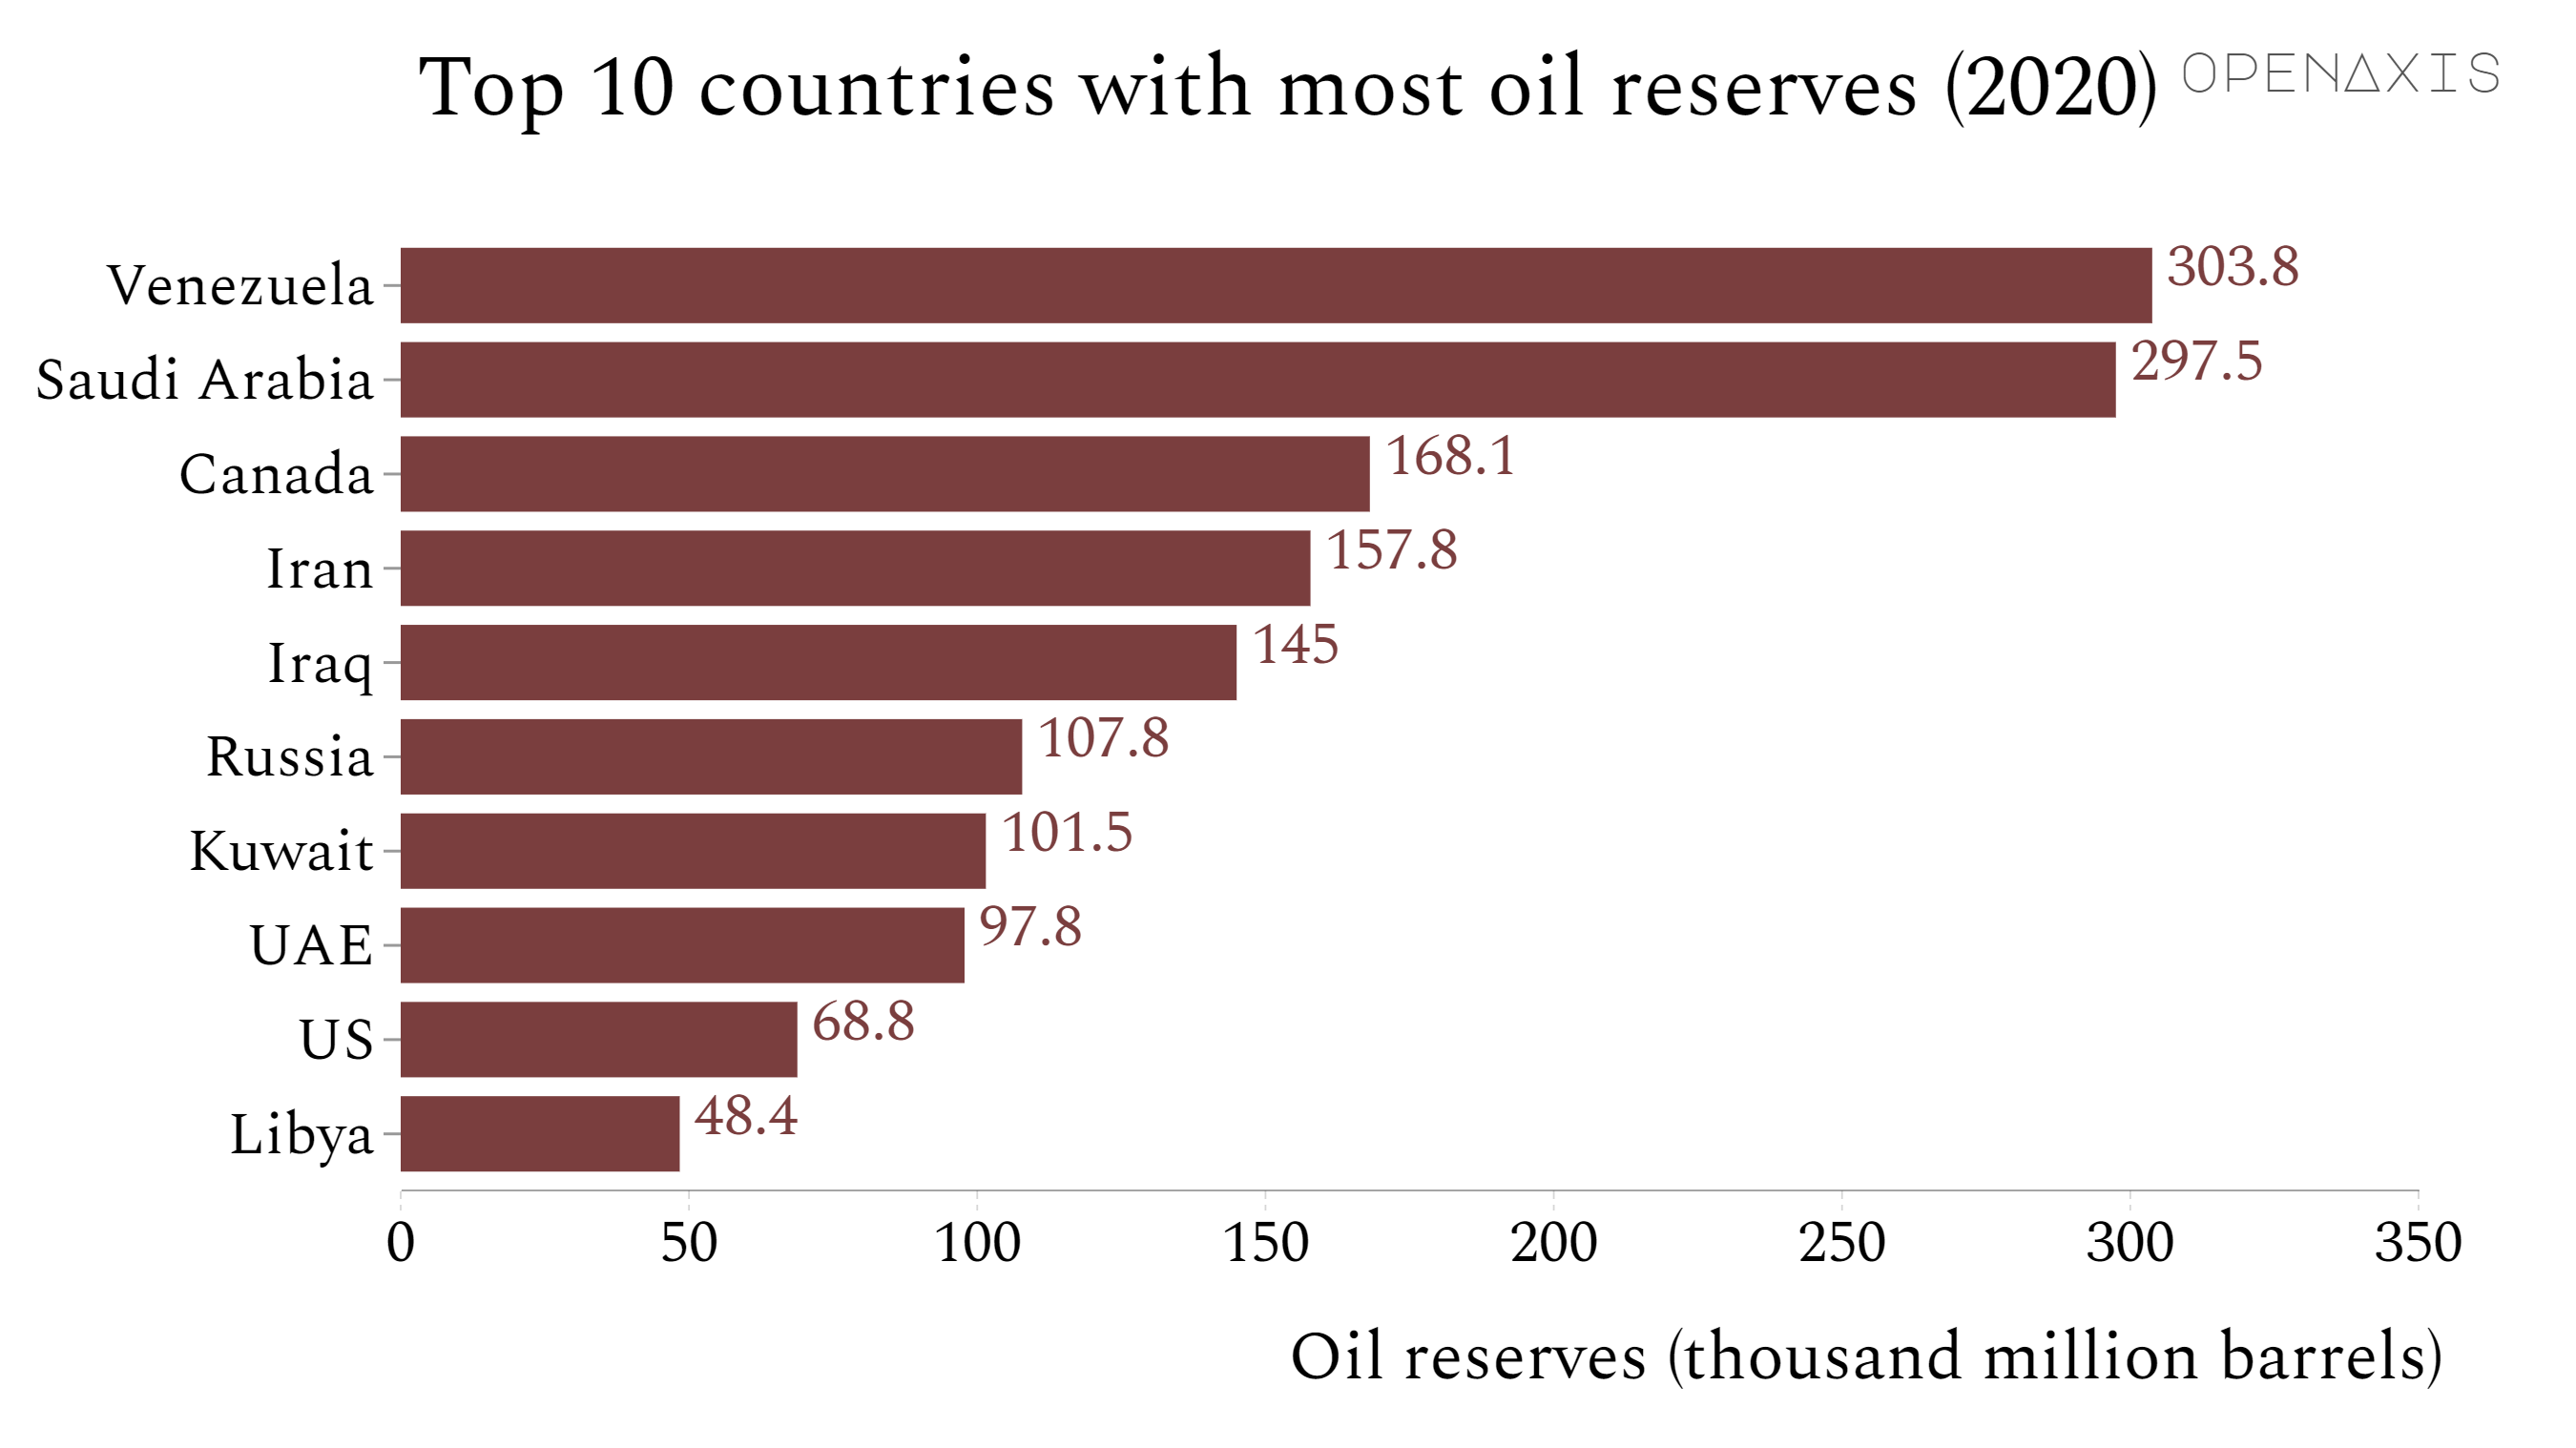 "Top 10 countries with most oil reserves (2020)"